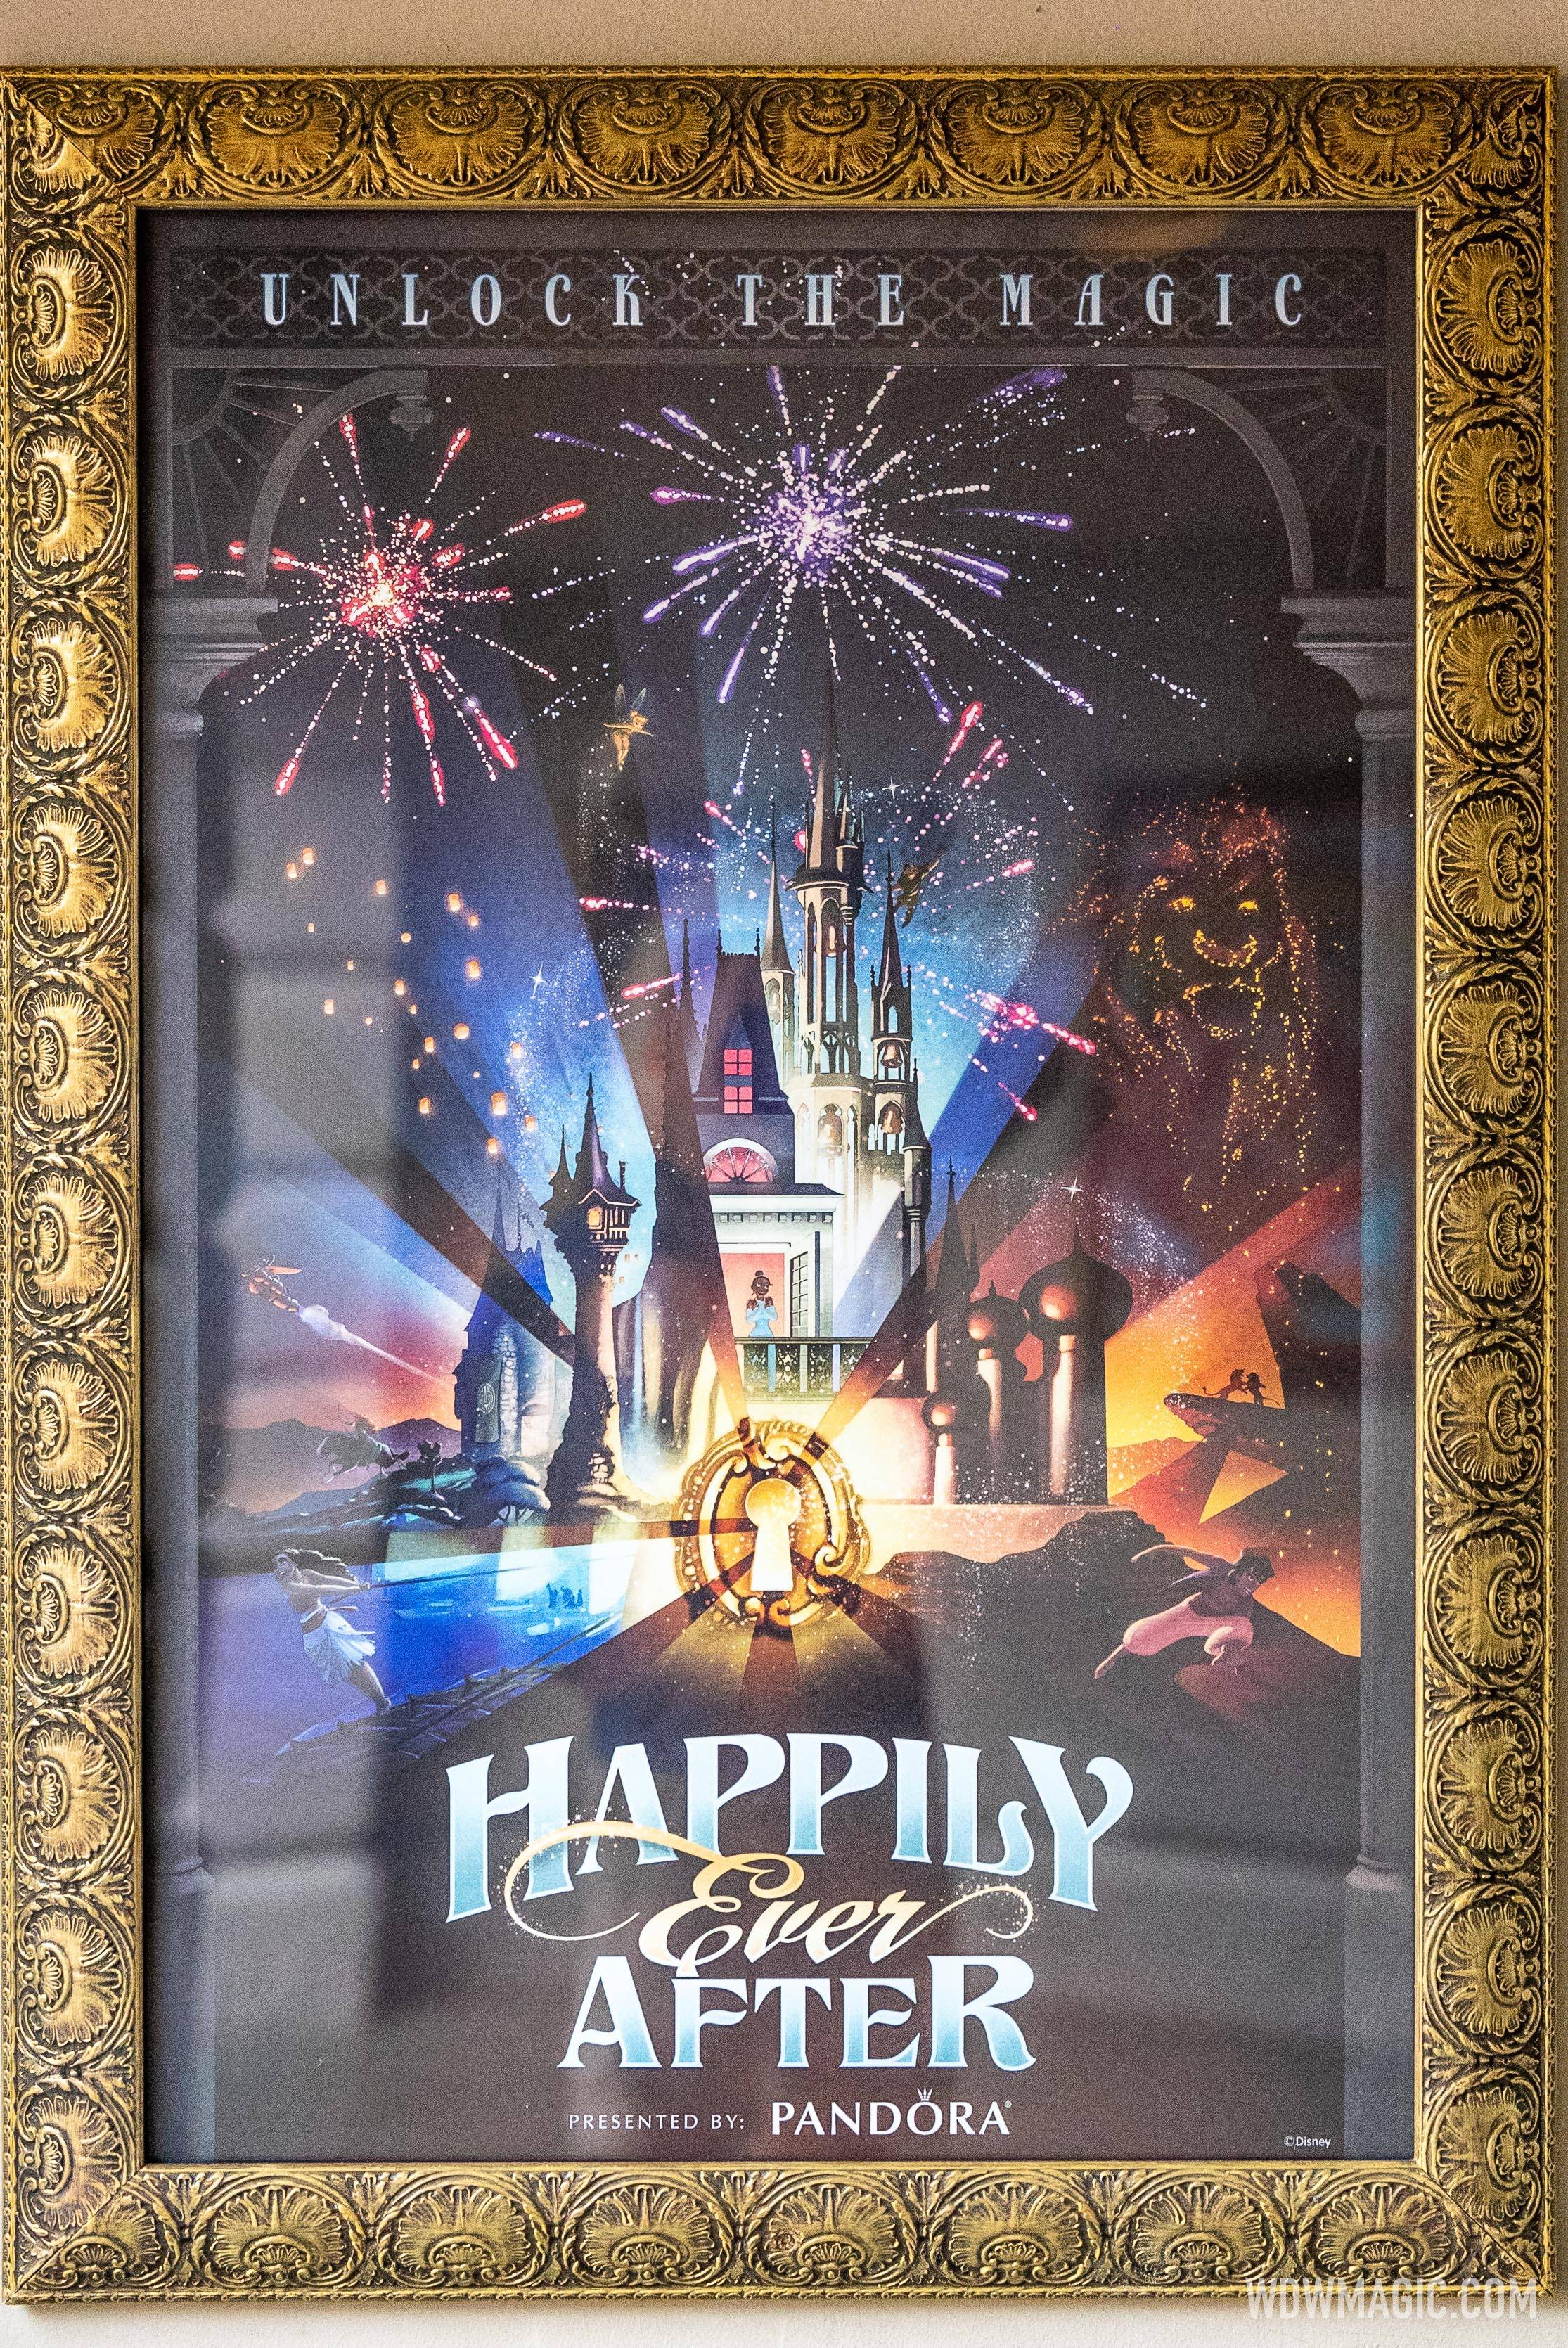 Happily Ever After poster at Main Street U.S.A. train station